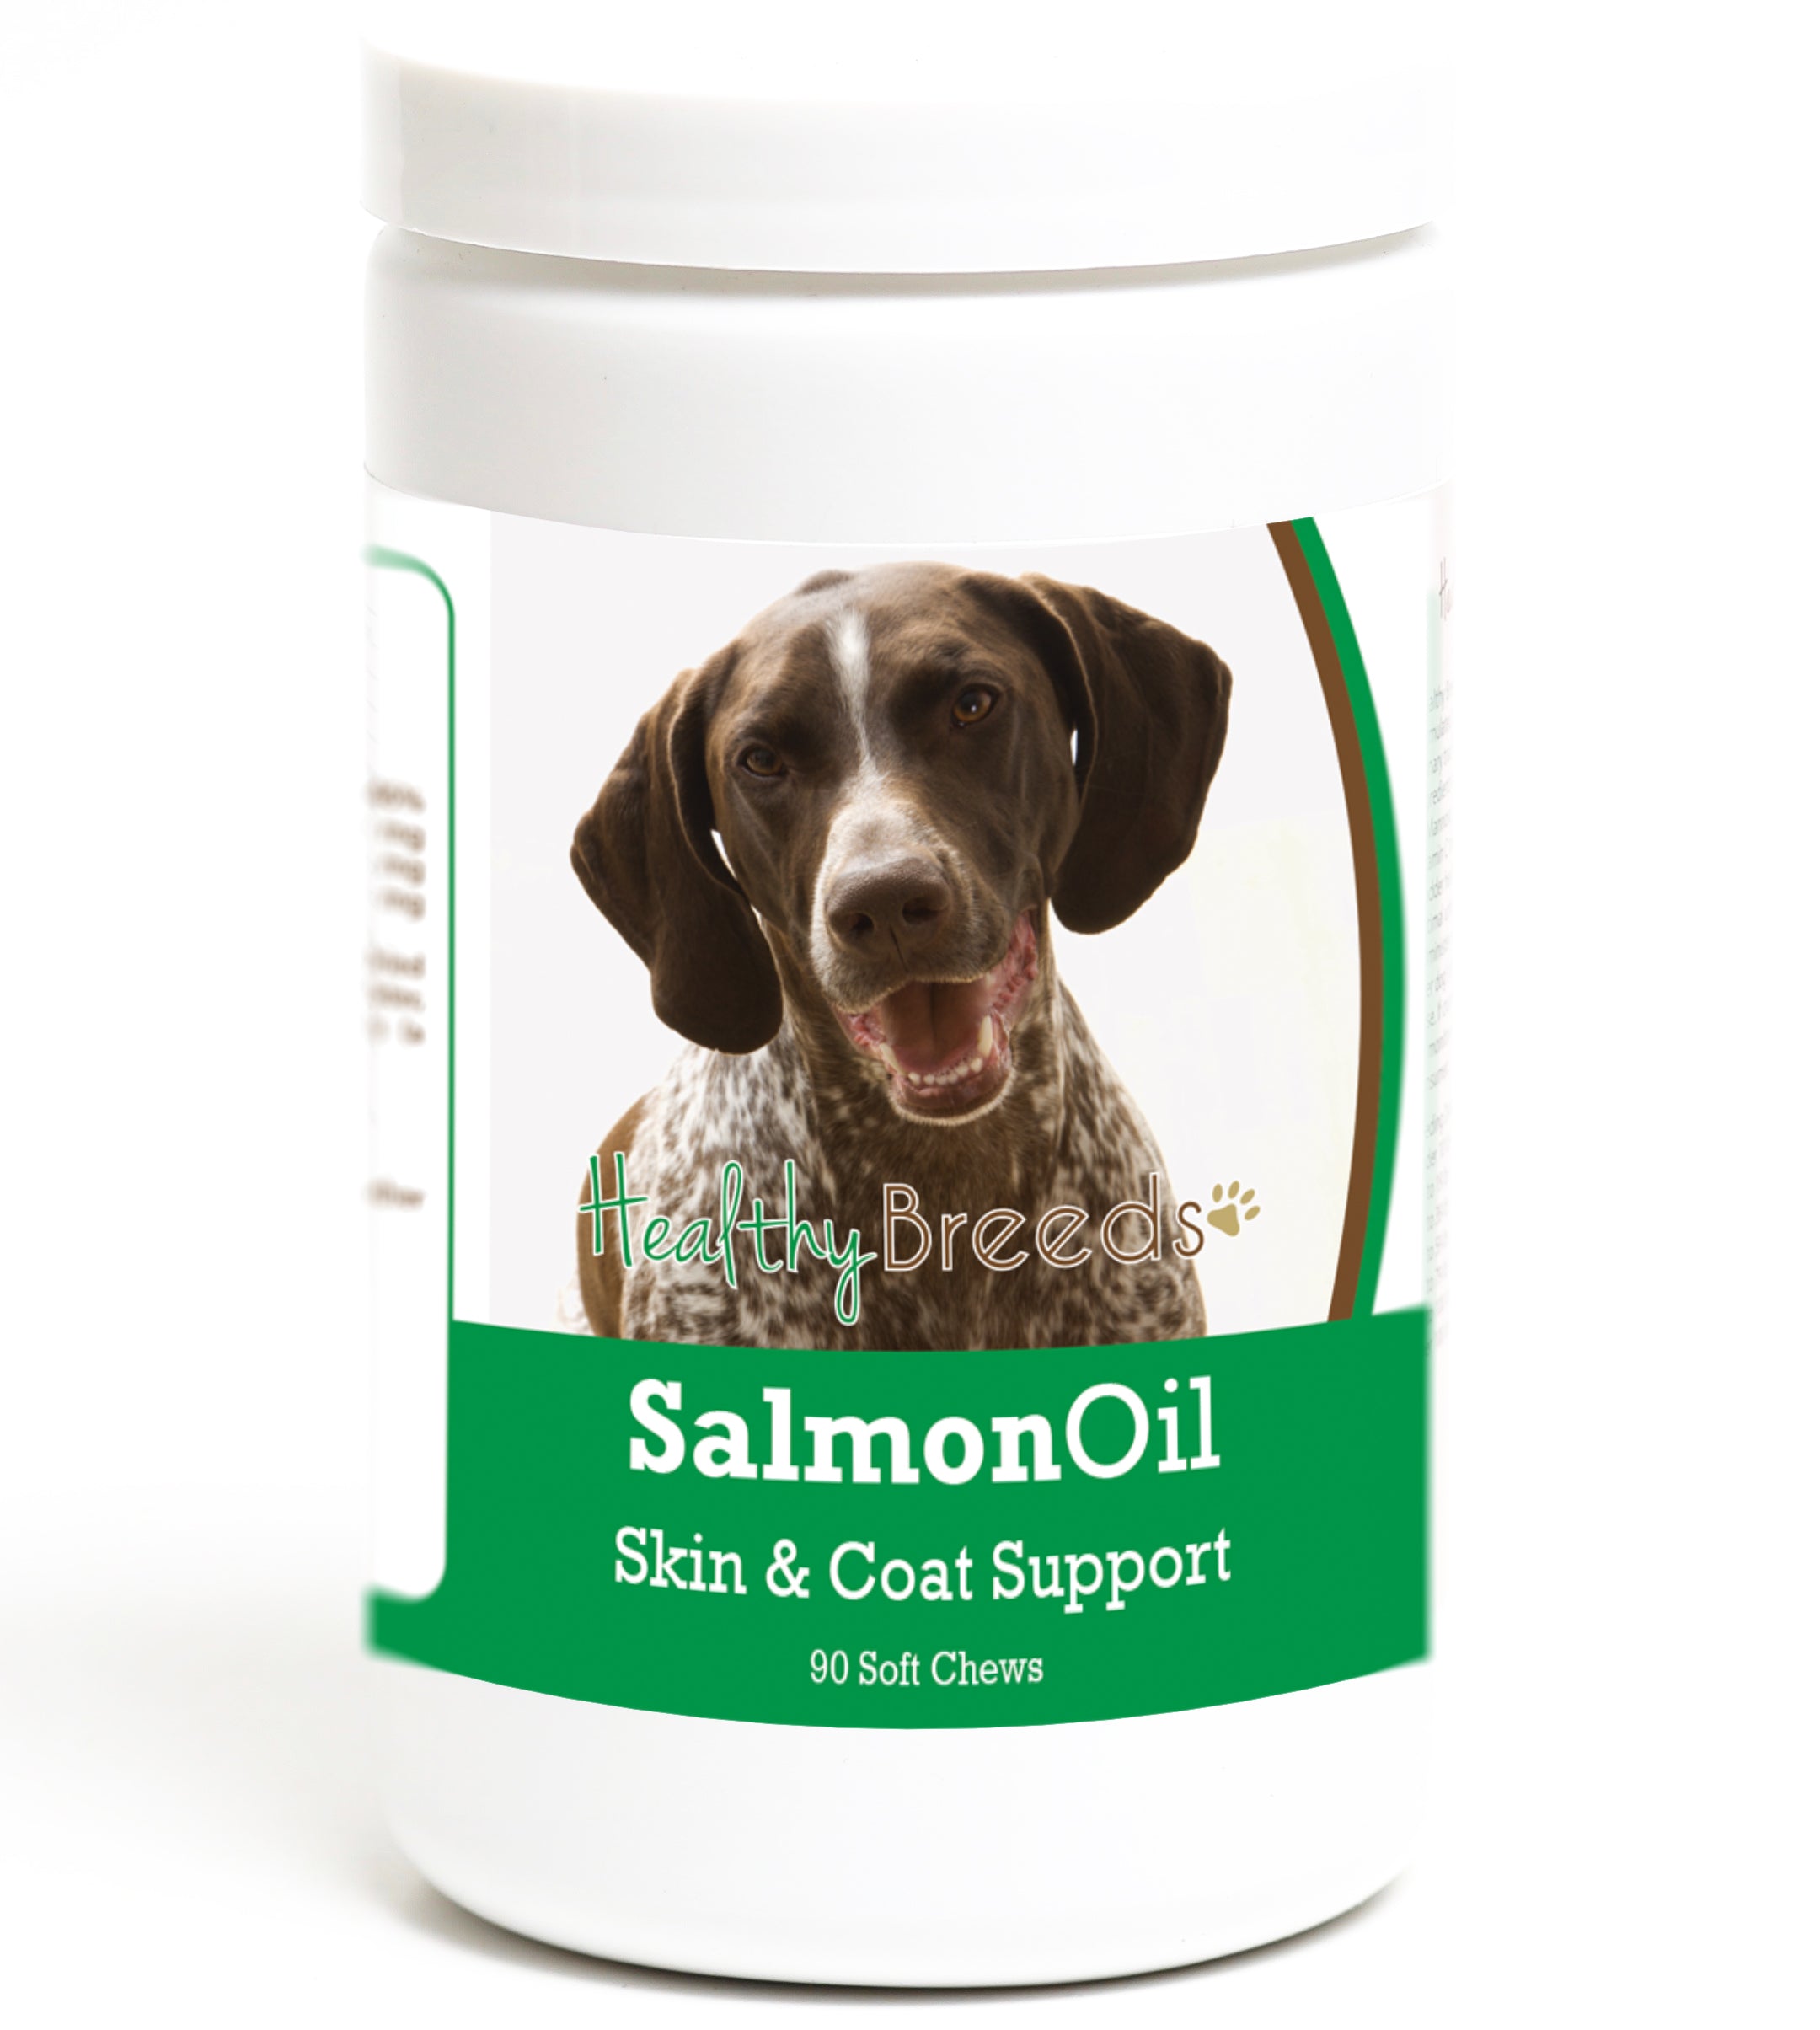 German Shorthaired Pointer Salmon Oil Soft Chews 90 Count